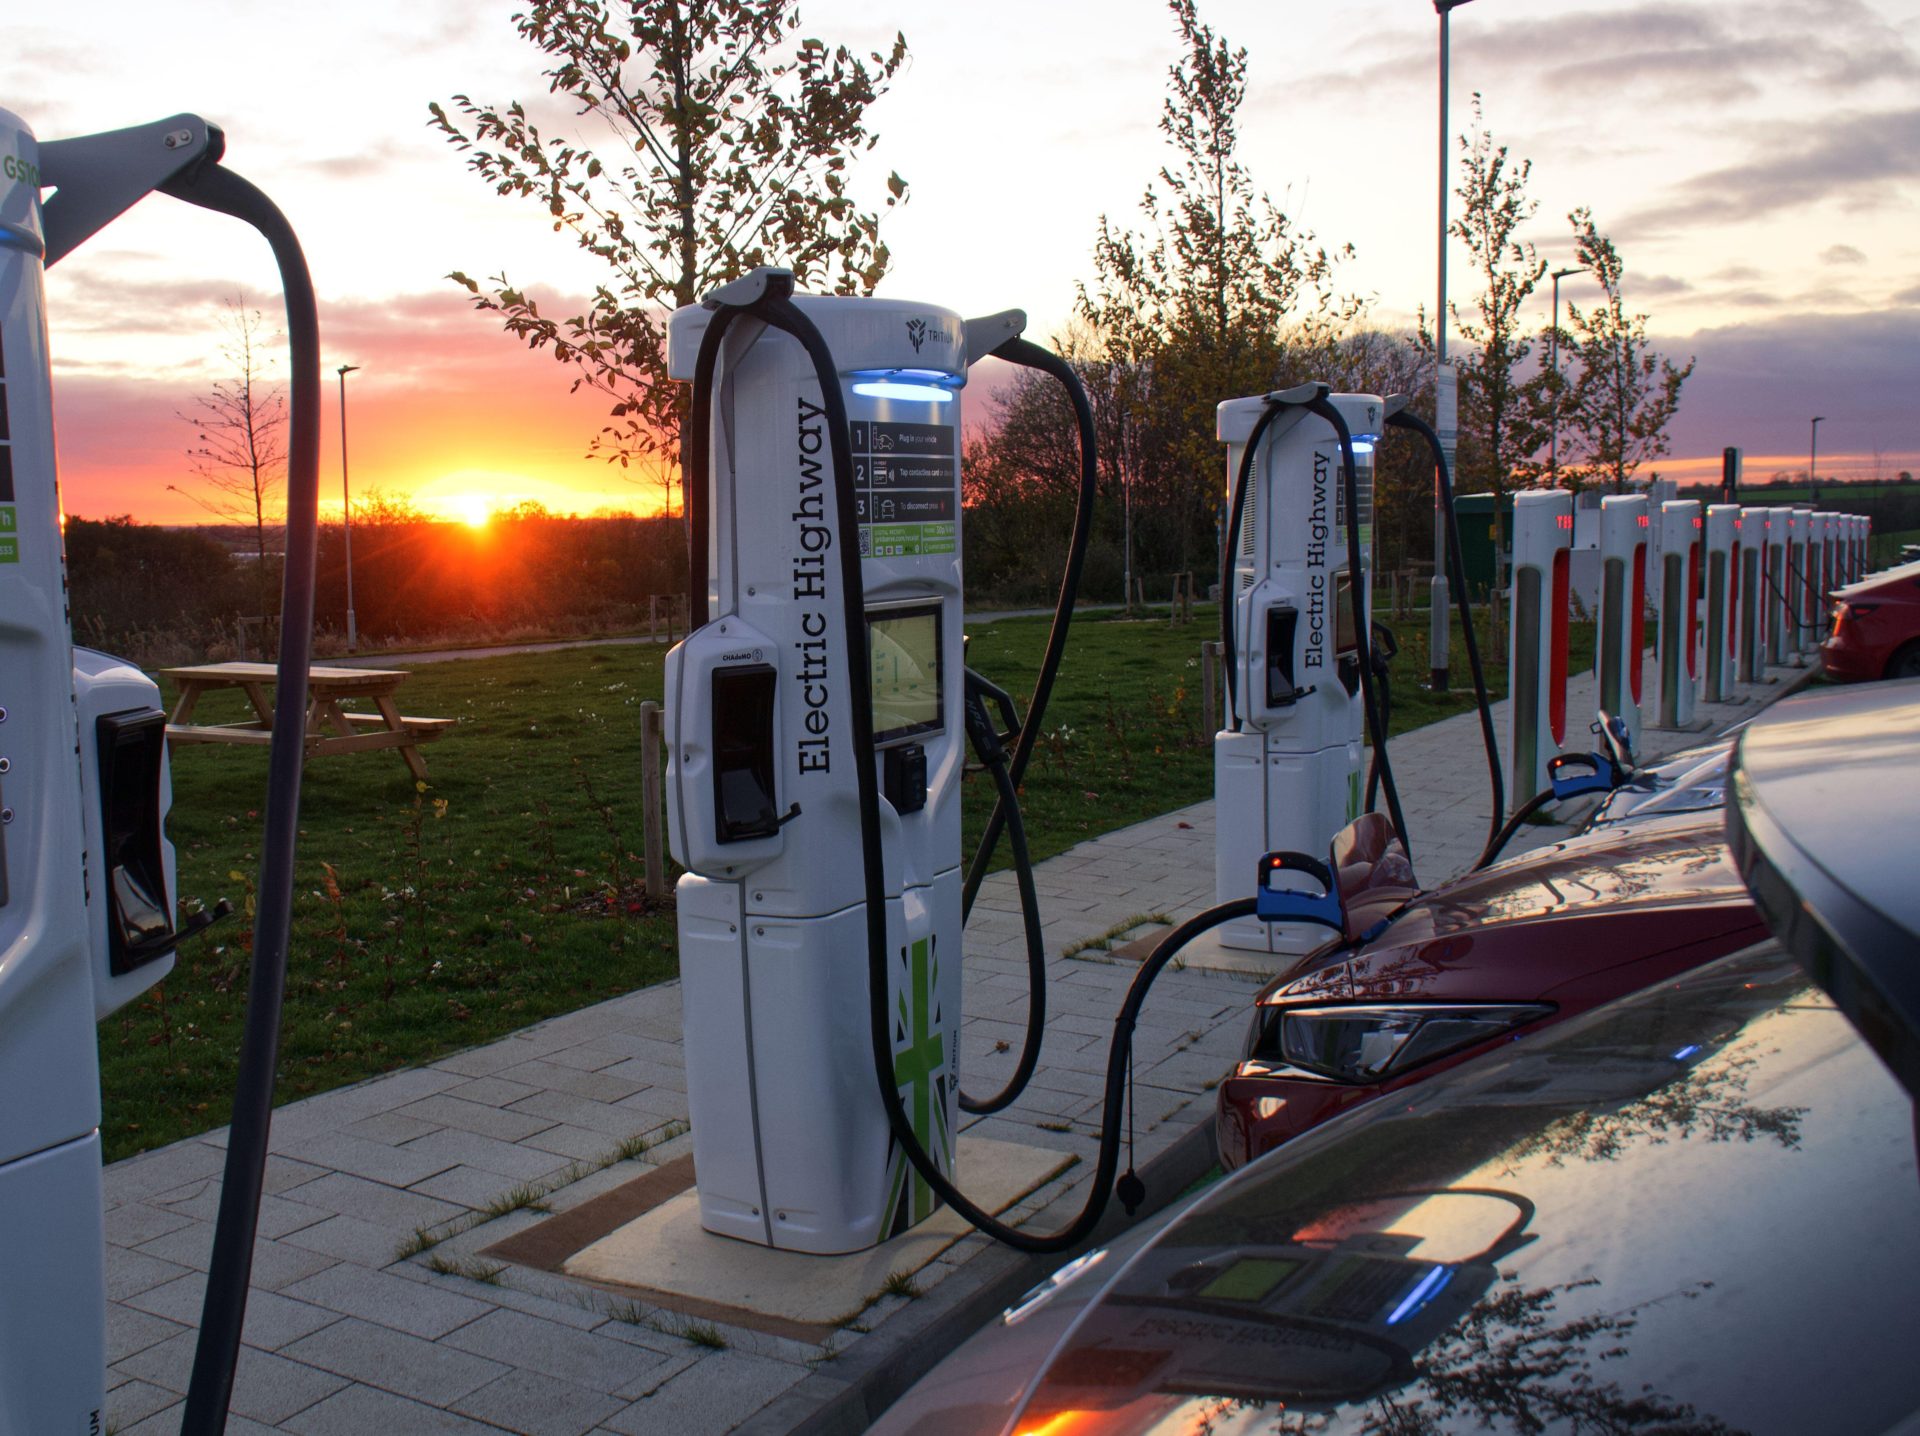 Electric vehicles charging at sunset at fast motorway chargers, 21-11-21.